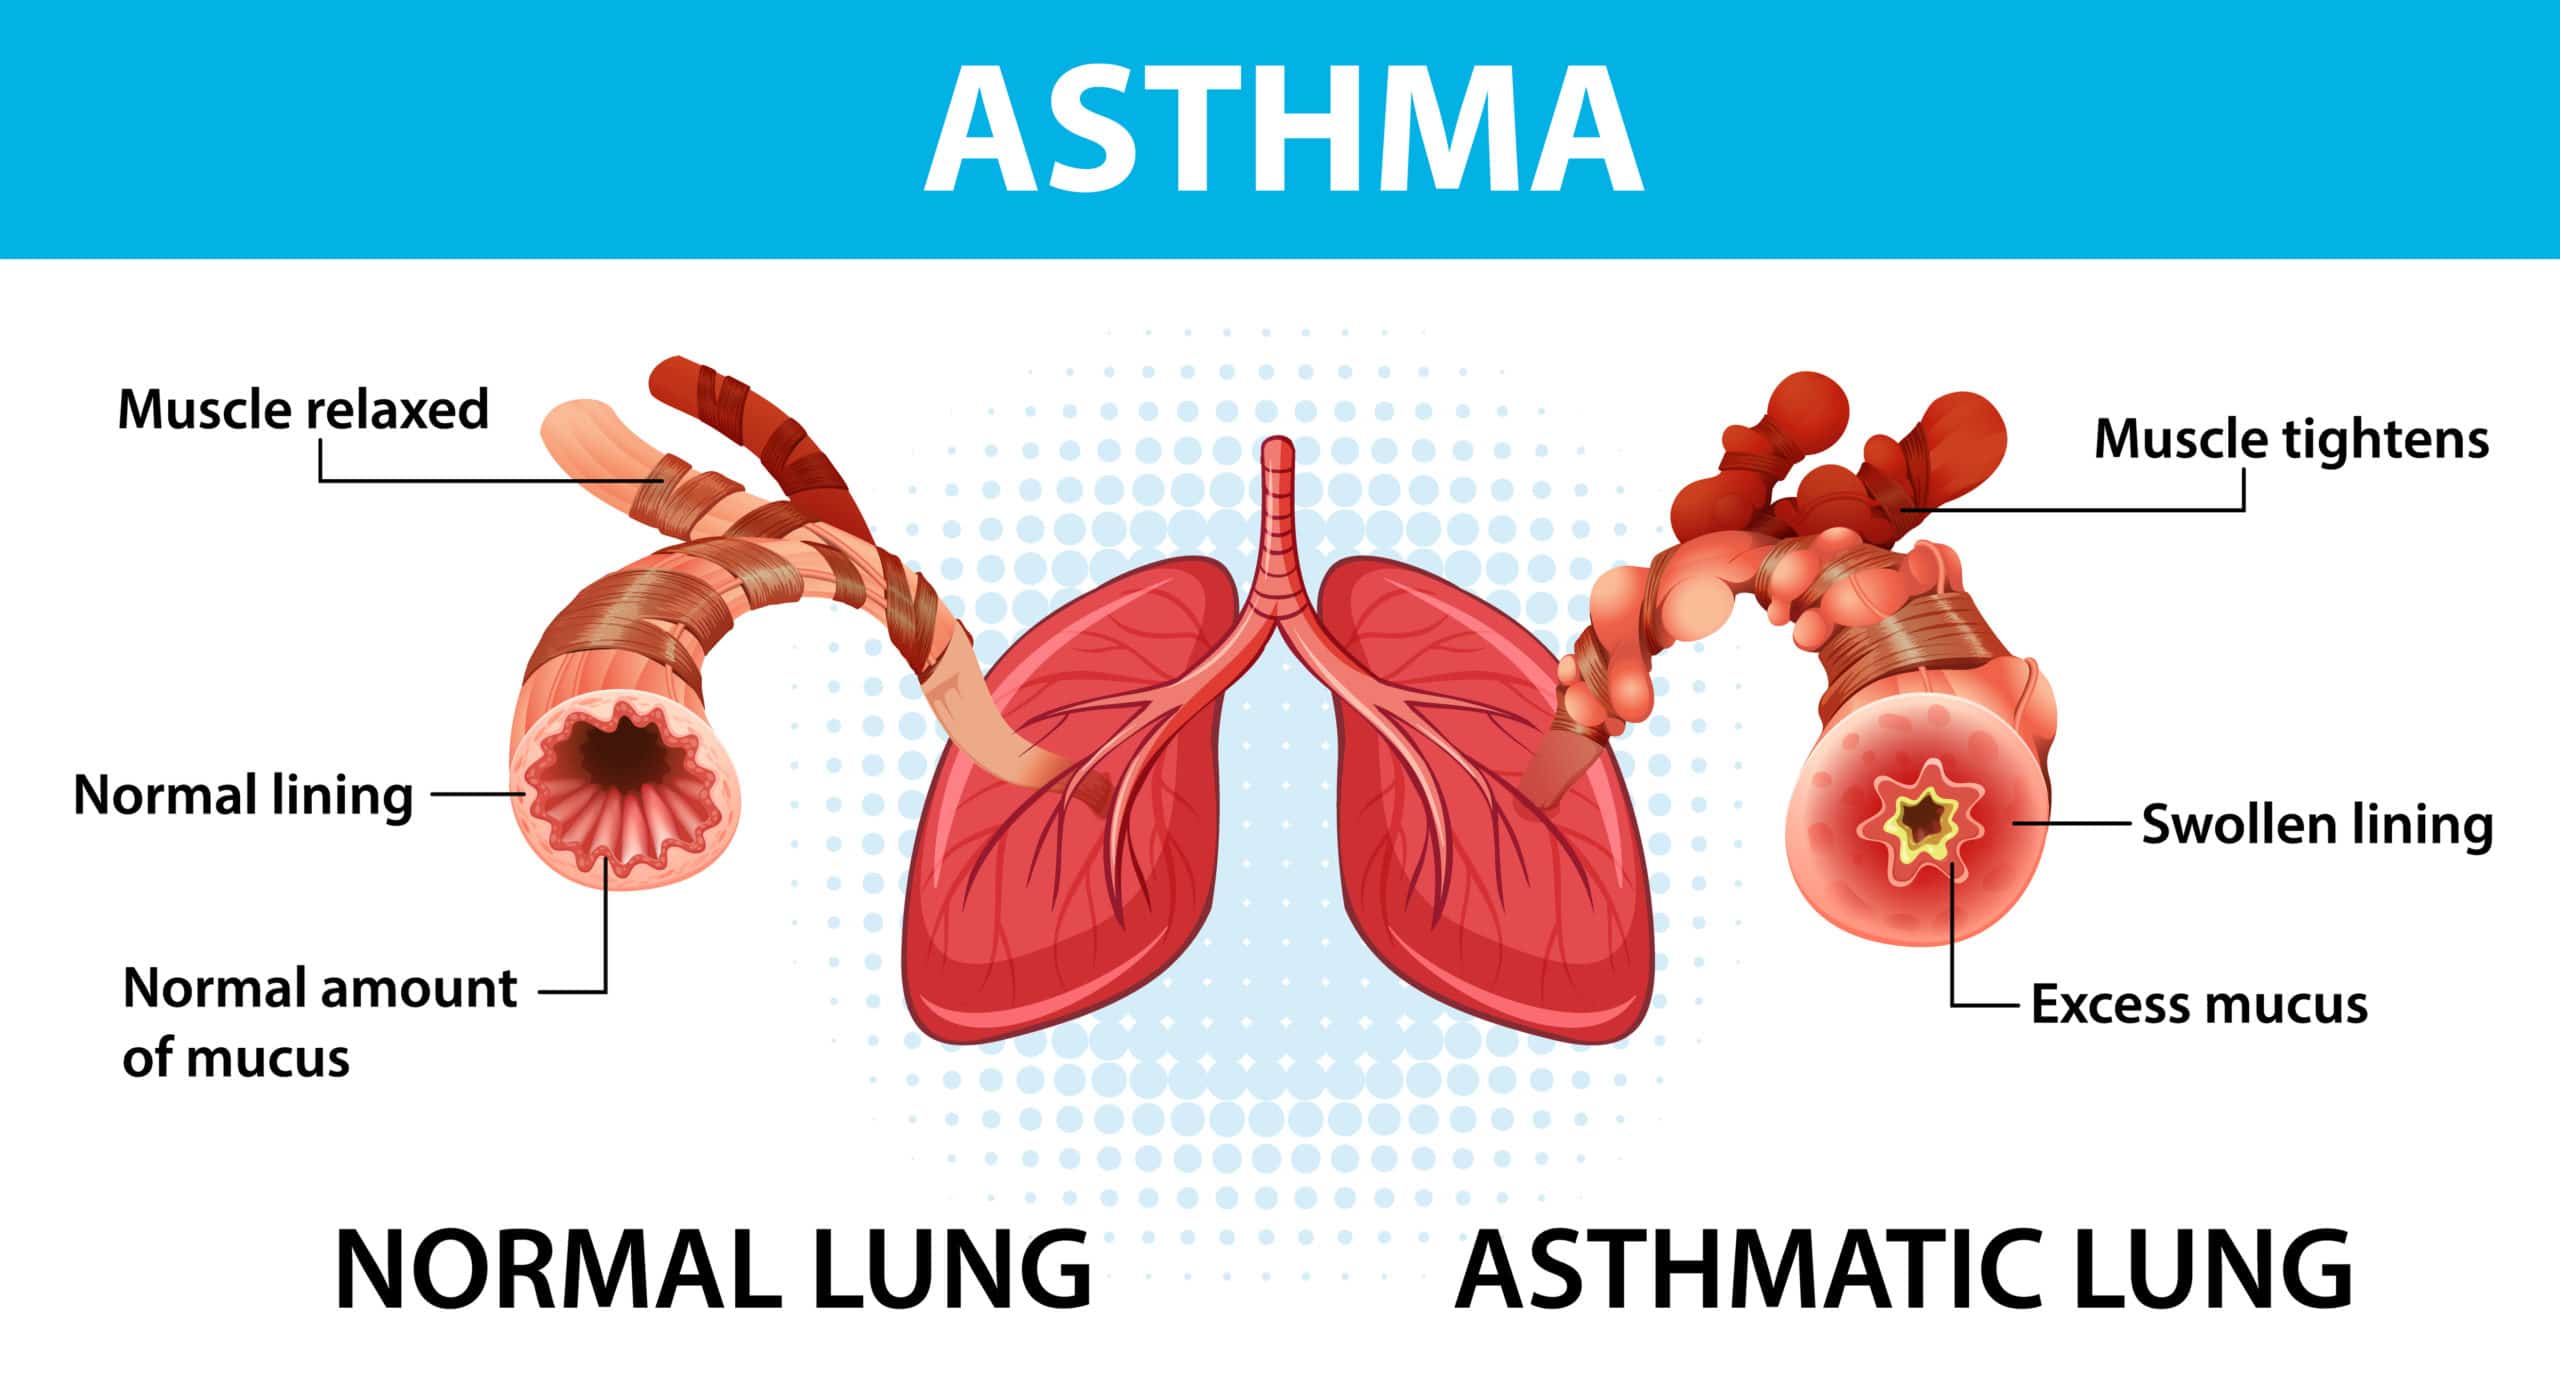 Asthma diagram with normal lung and asthmatic lung illustration